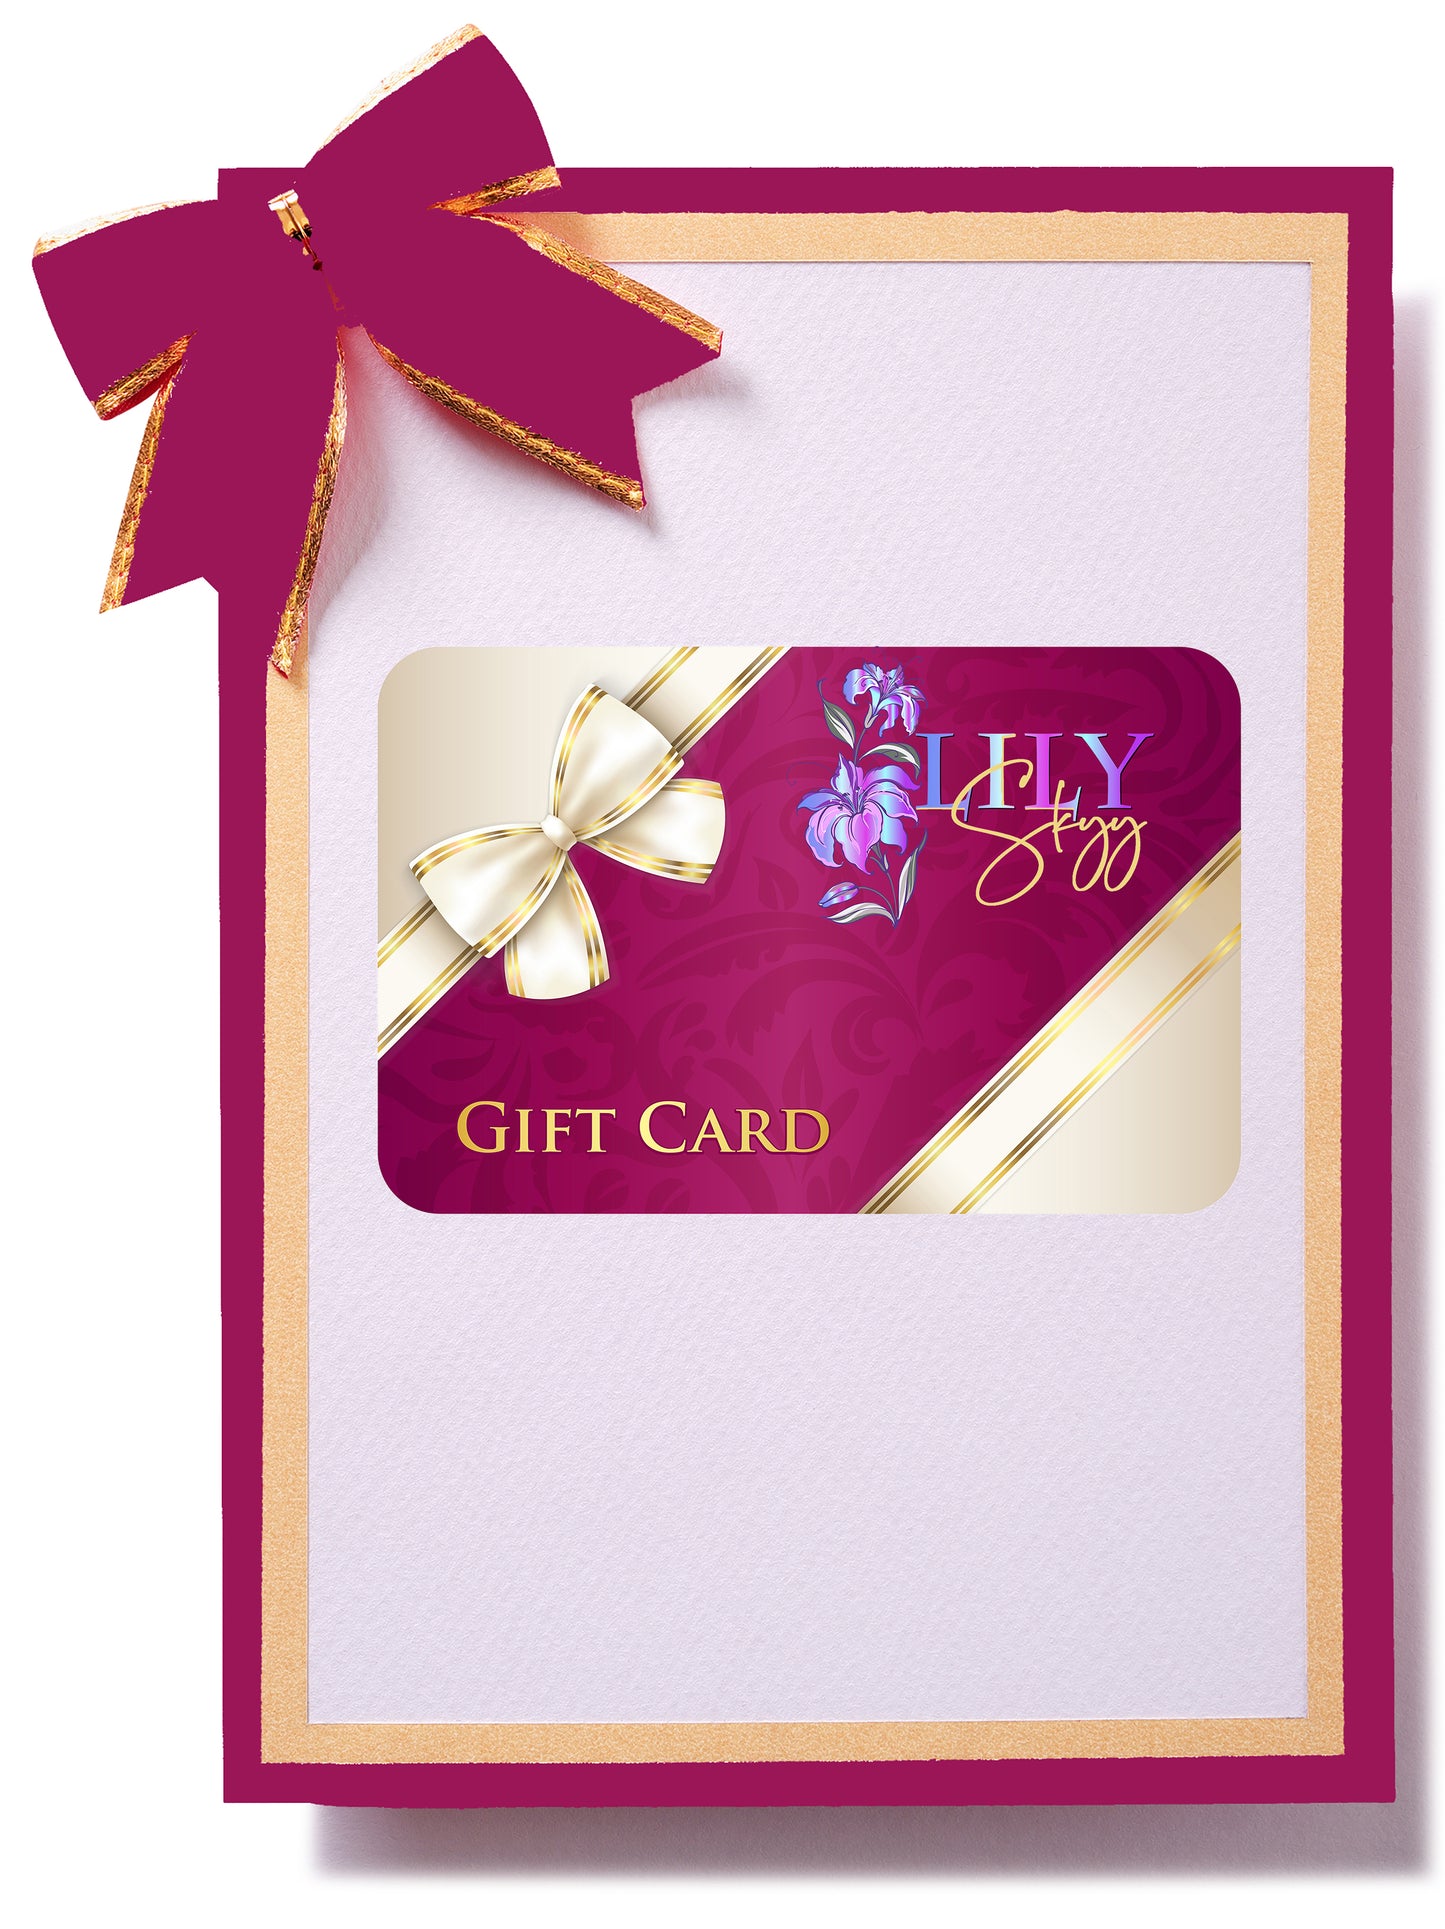 Lily Skyy Gift Card